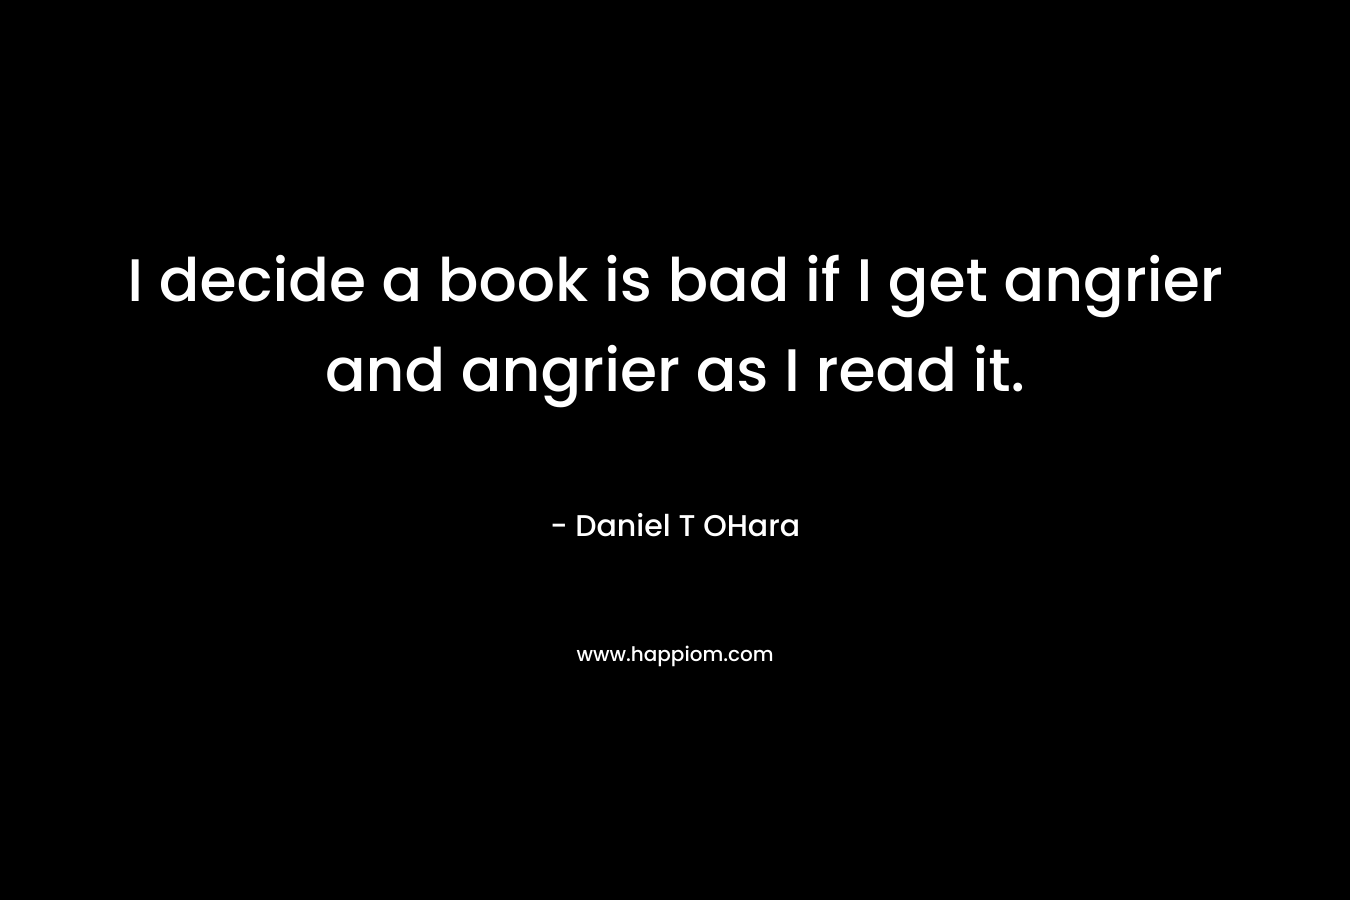 I decide a book is bad if I get angrier and angrier as I read it.